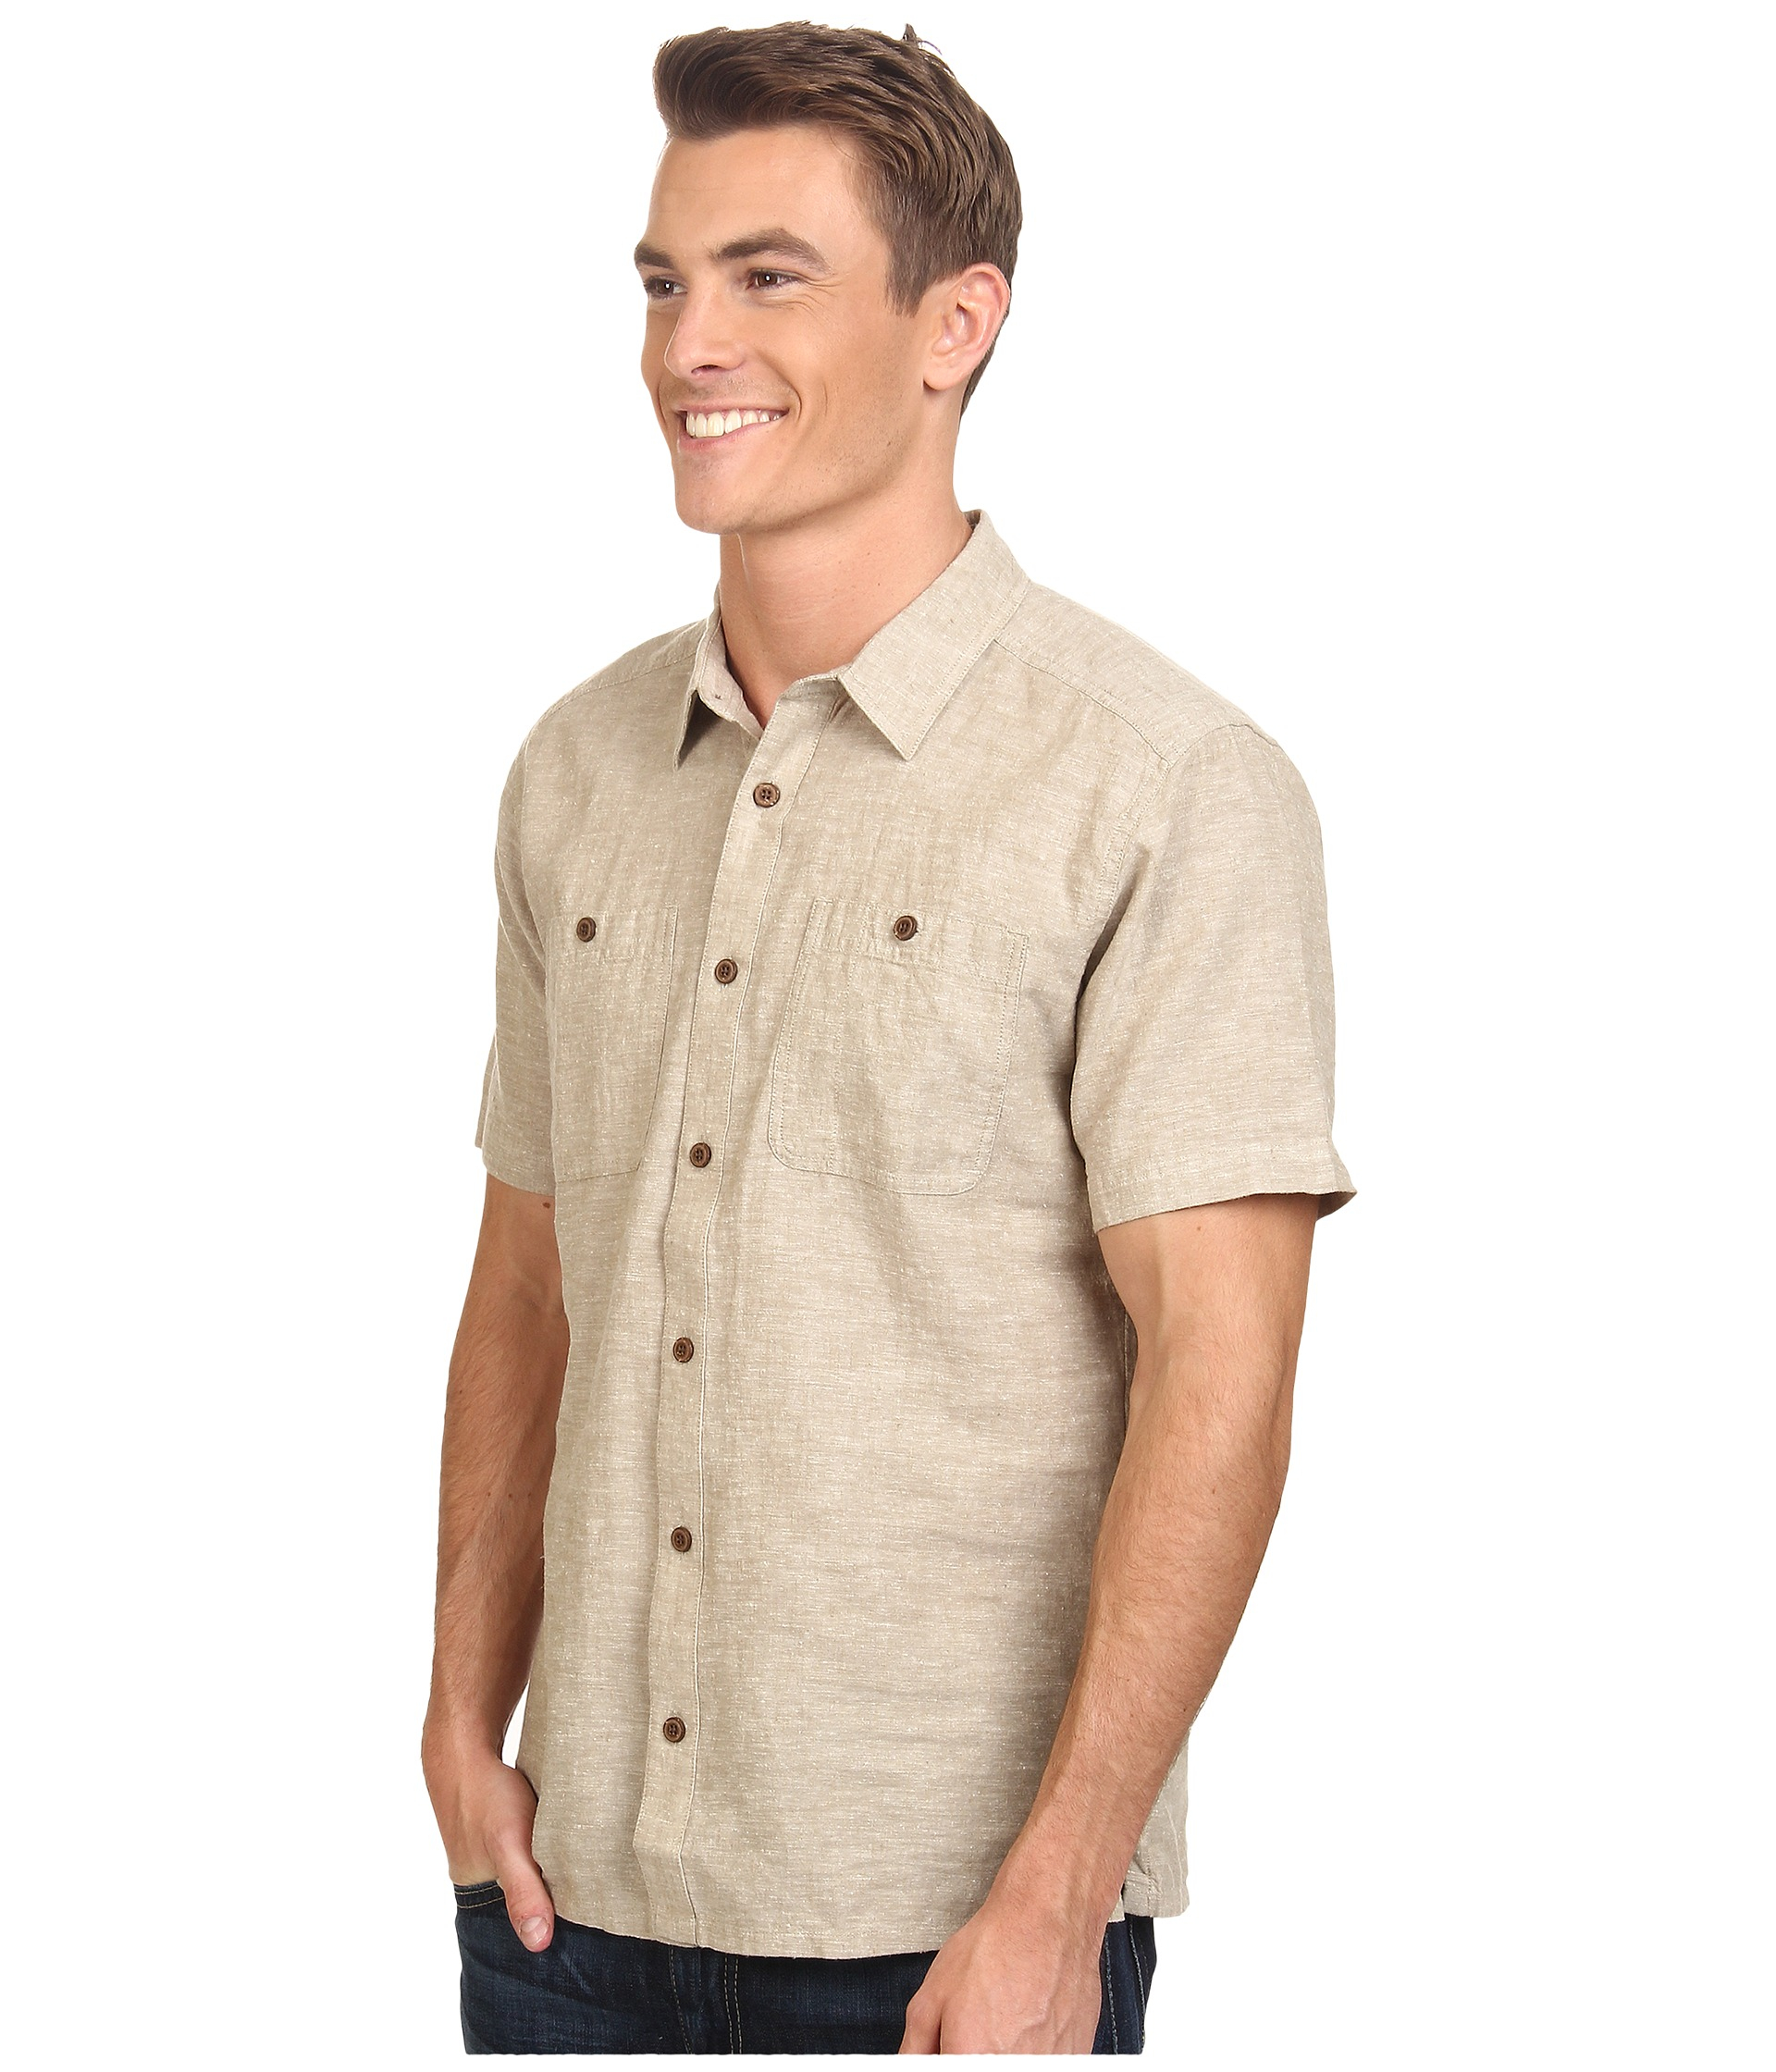 Lyst - Patagonia Back Step Shirt in Natural for Men